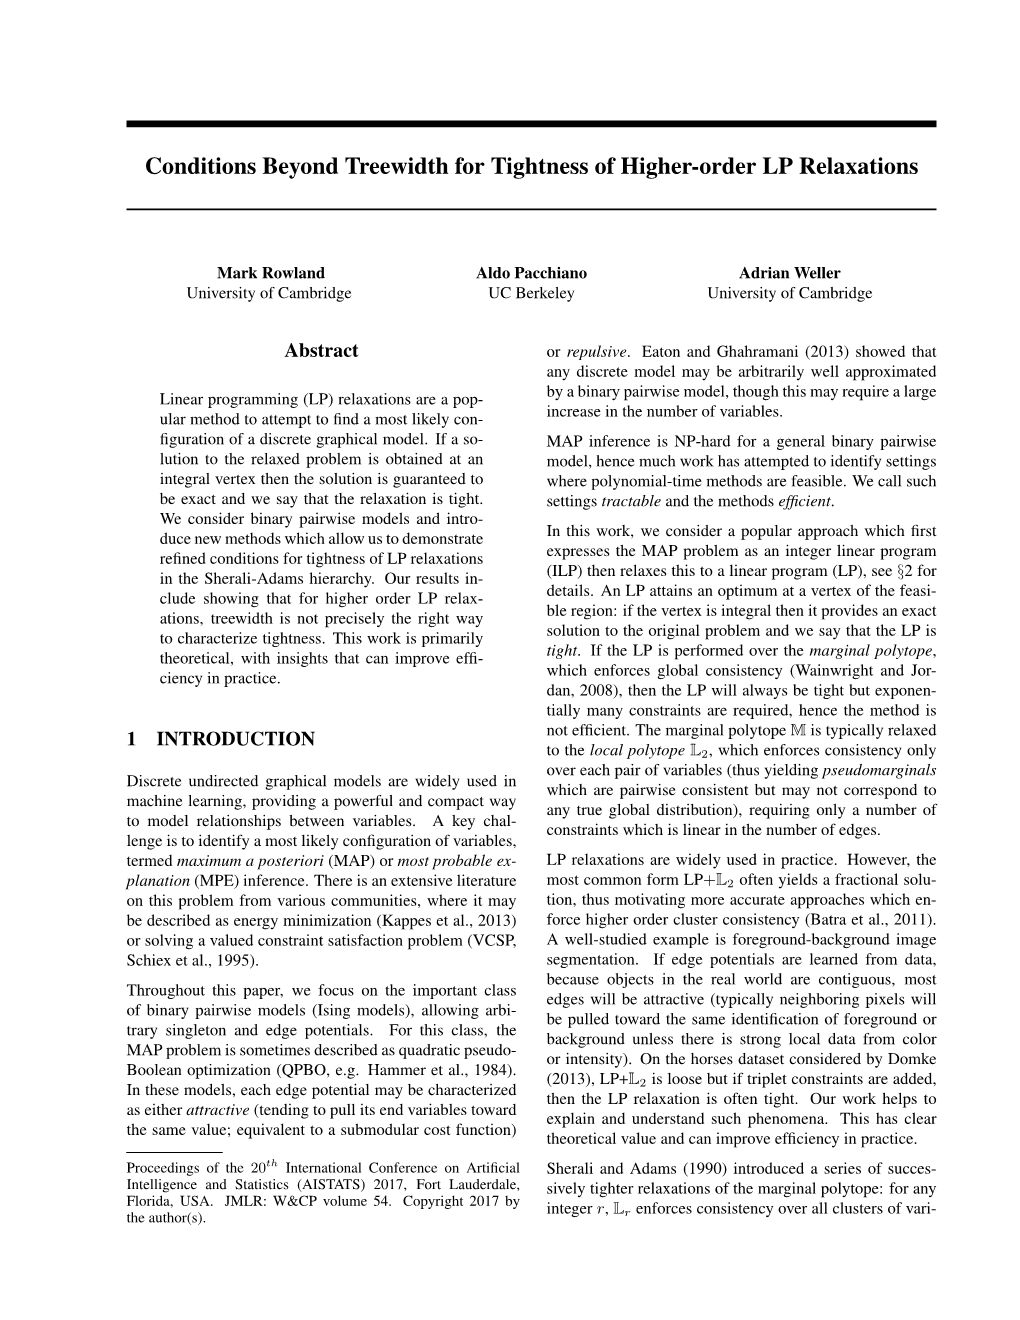 Conditions Beyond Treewidth for Tightness of Higher-Order LP Relaxations